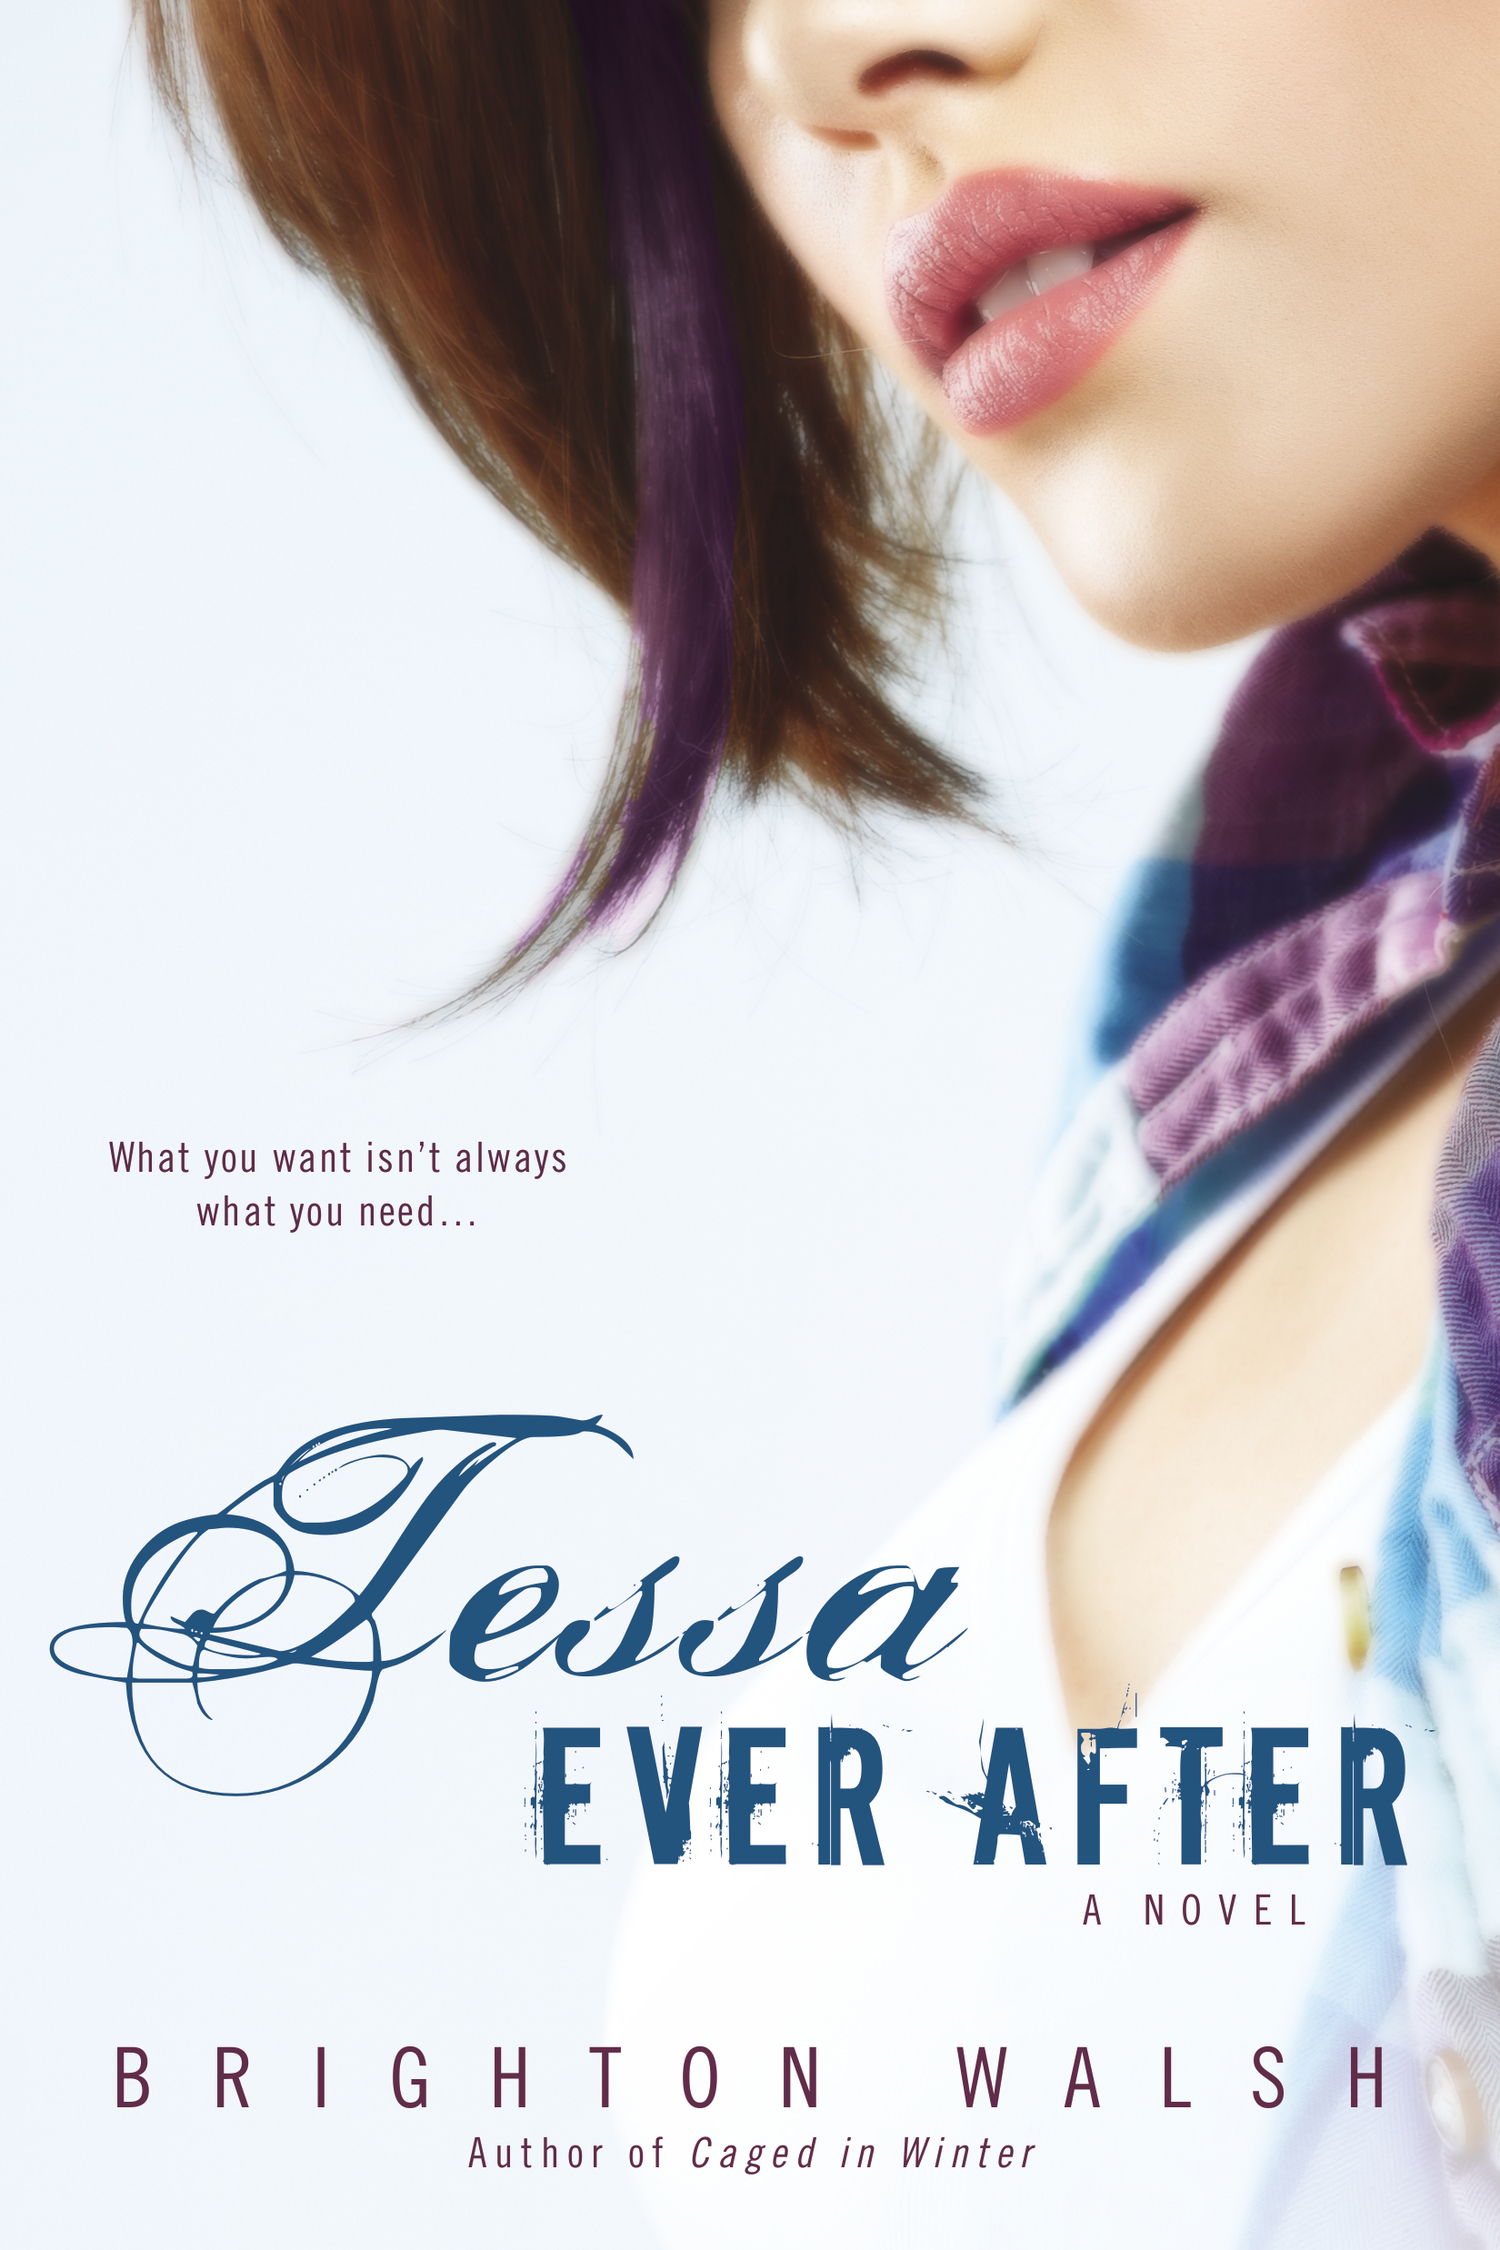 Tessa Ever After by Brighton Walsh Blog Tour Review + Giveaway